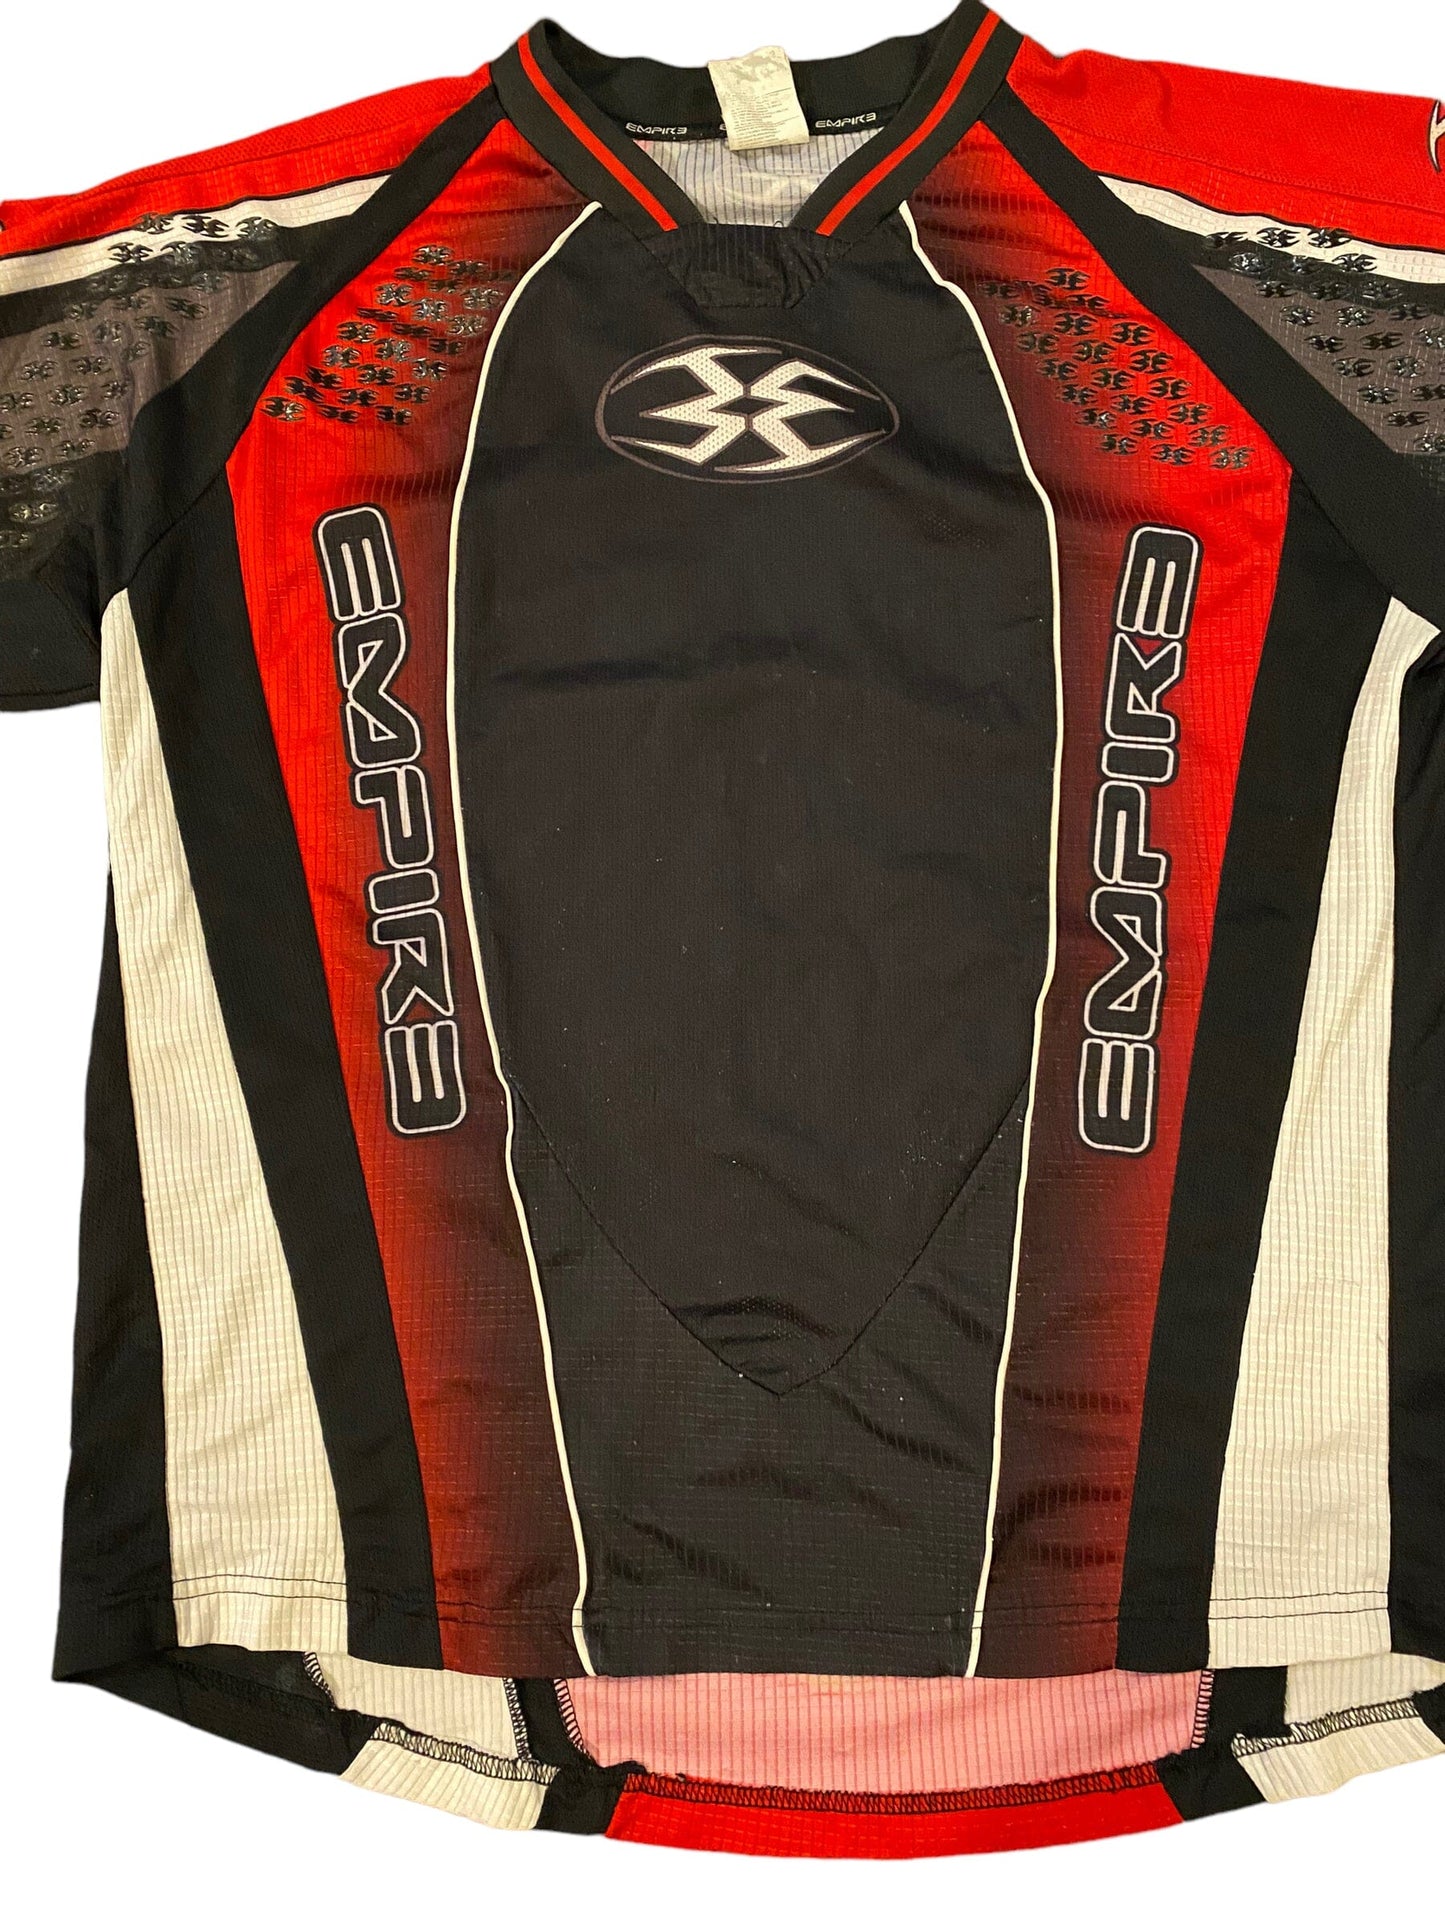 Used Empire Paintball Jersey size X-Large Paintball Gun from CPXBrosPaintball Buy/Sell/Trade Paintball Markers, Paintball Hoppers, Paintball Masks, and Hormesis Headbands